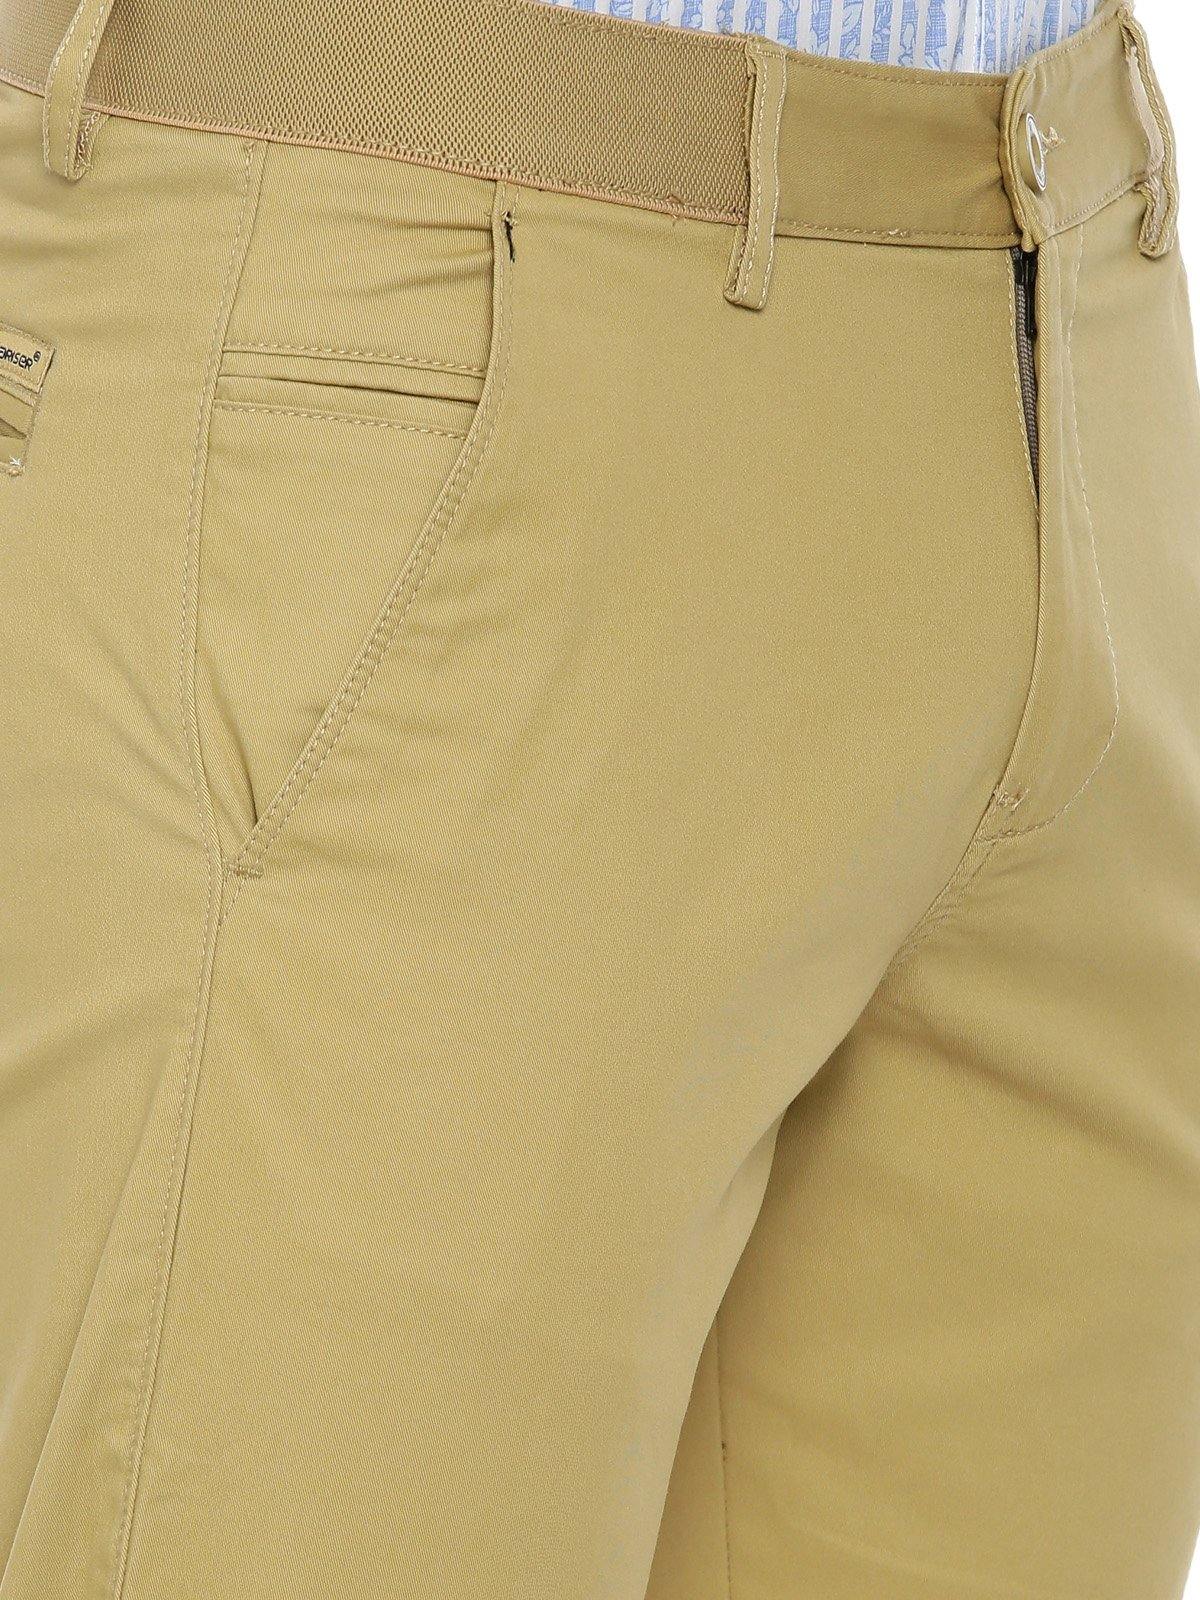 Brown Slim Fit Cotton Lycra Pants for Men by GentWith.com